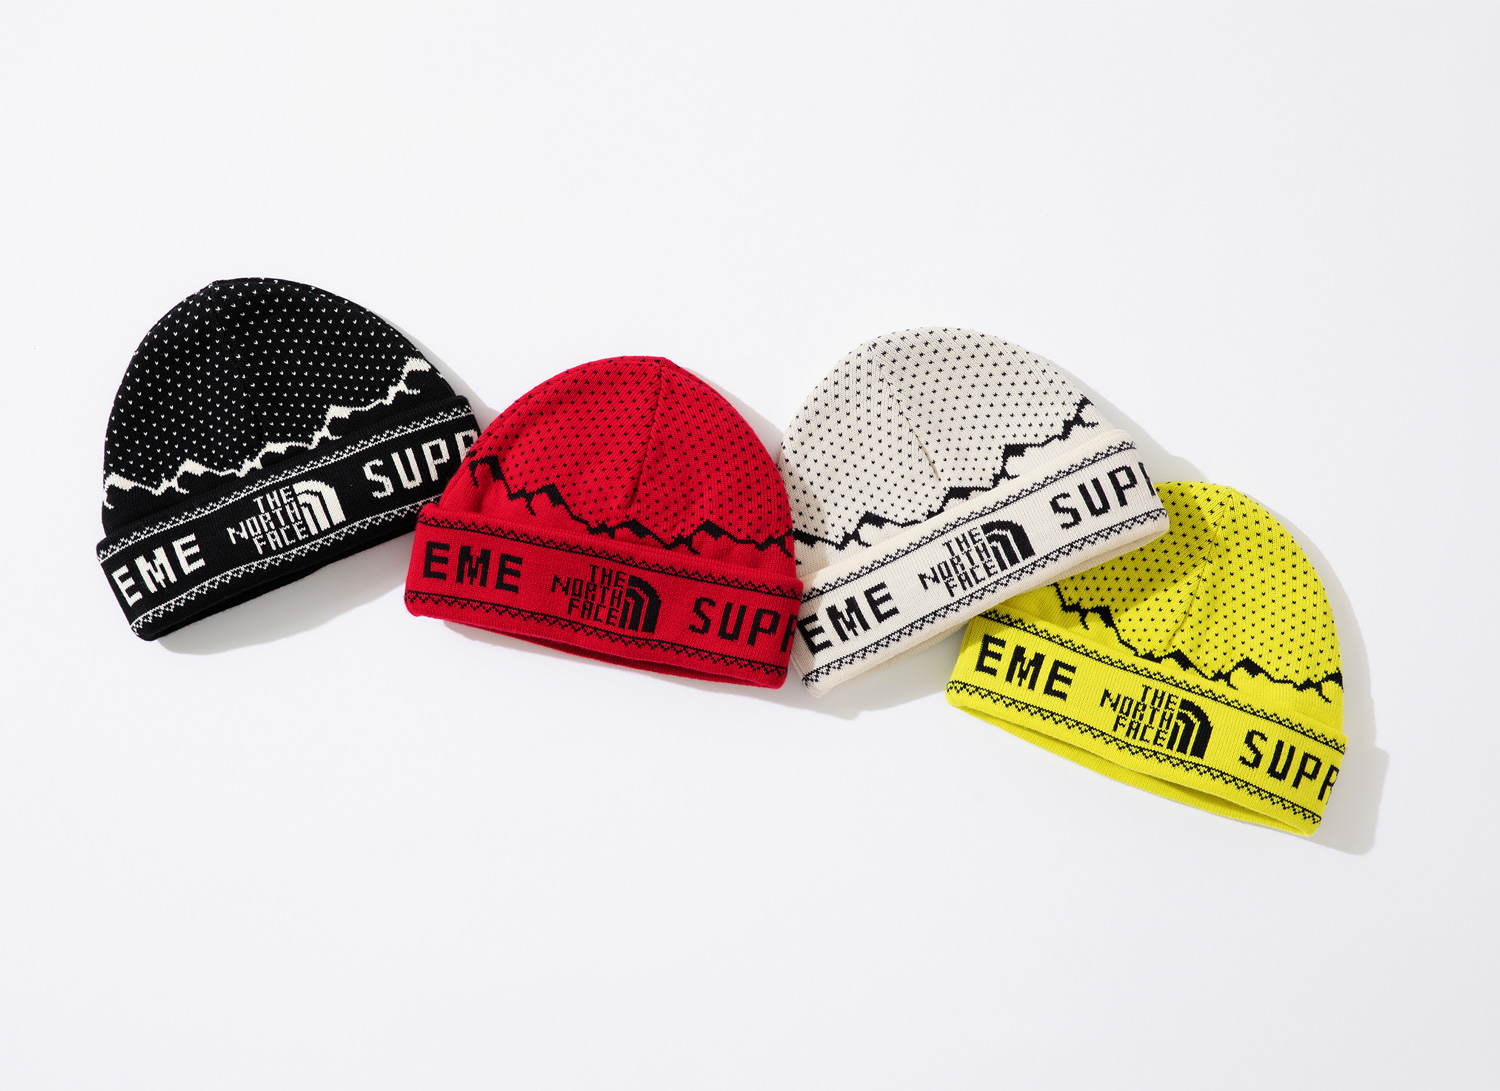 Supreme®/The North Face® Fold Beanie